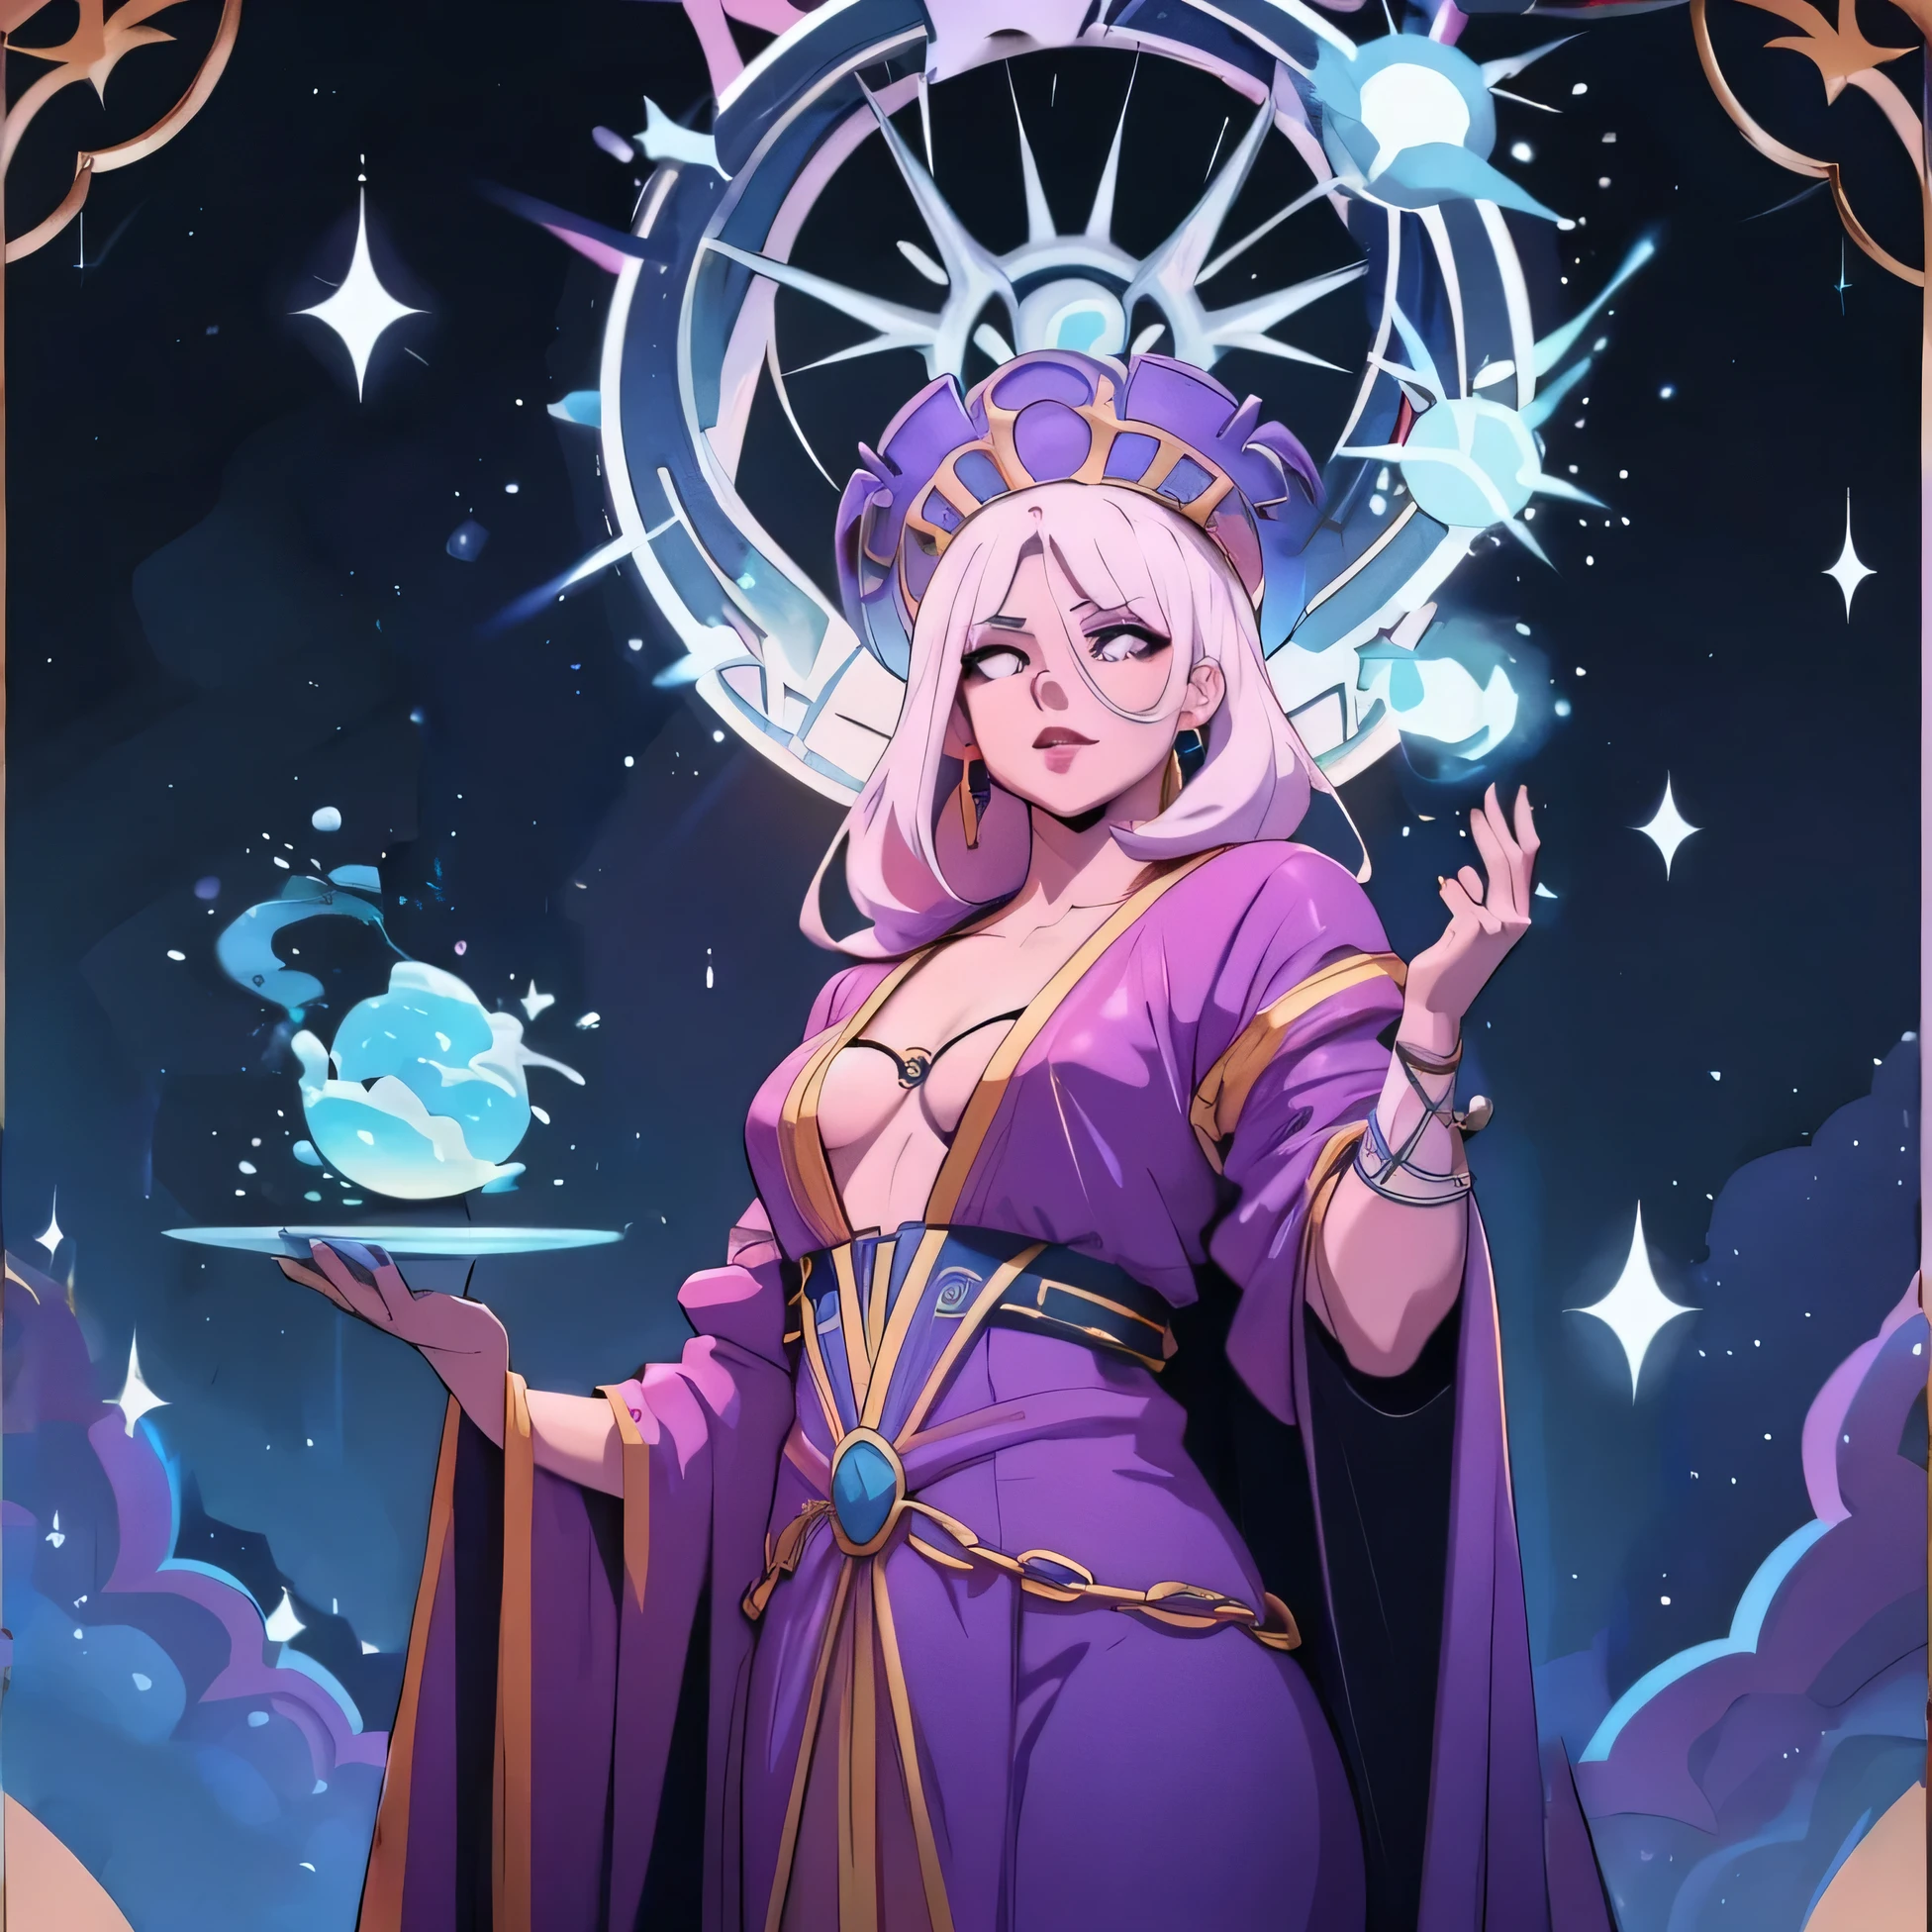 a poster of a woman in a pink dress holding a wand, I will tear from the overlord, Arcane art style, dueling style, omen from valorant, evil sorcerer, handsome dream demon, Demonic robes, will tear the fallen blood, noble demon character design, black magician girl, paleta de colores hyper light drifter